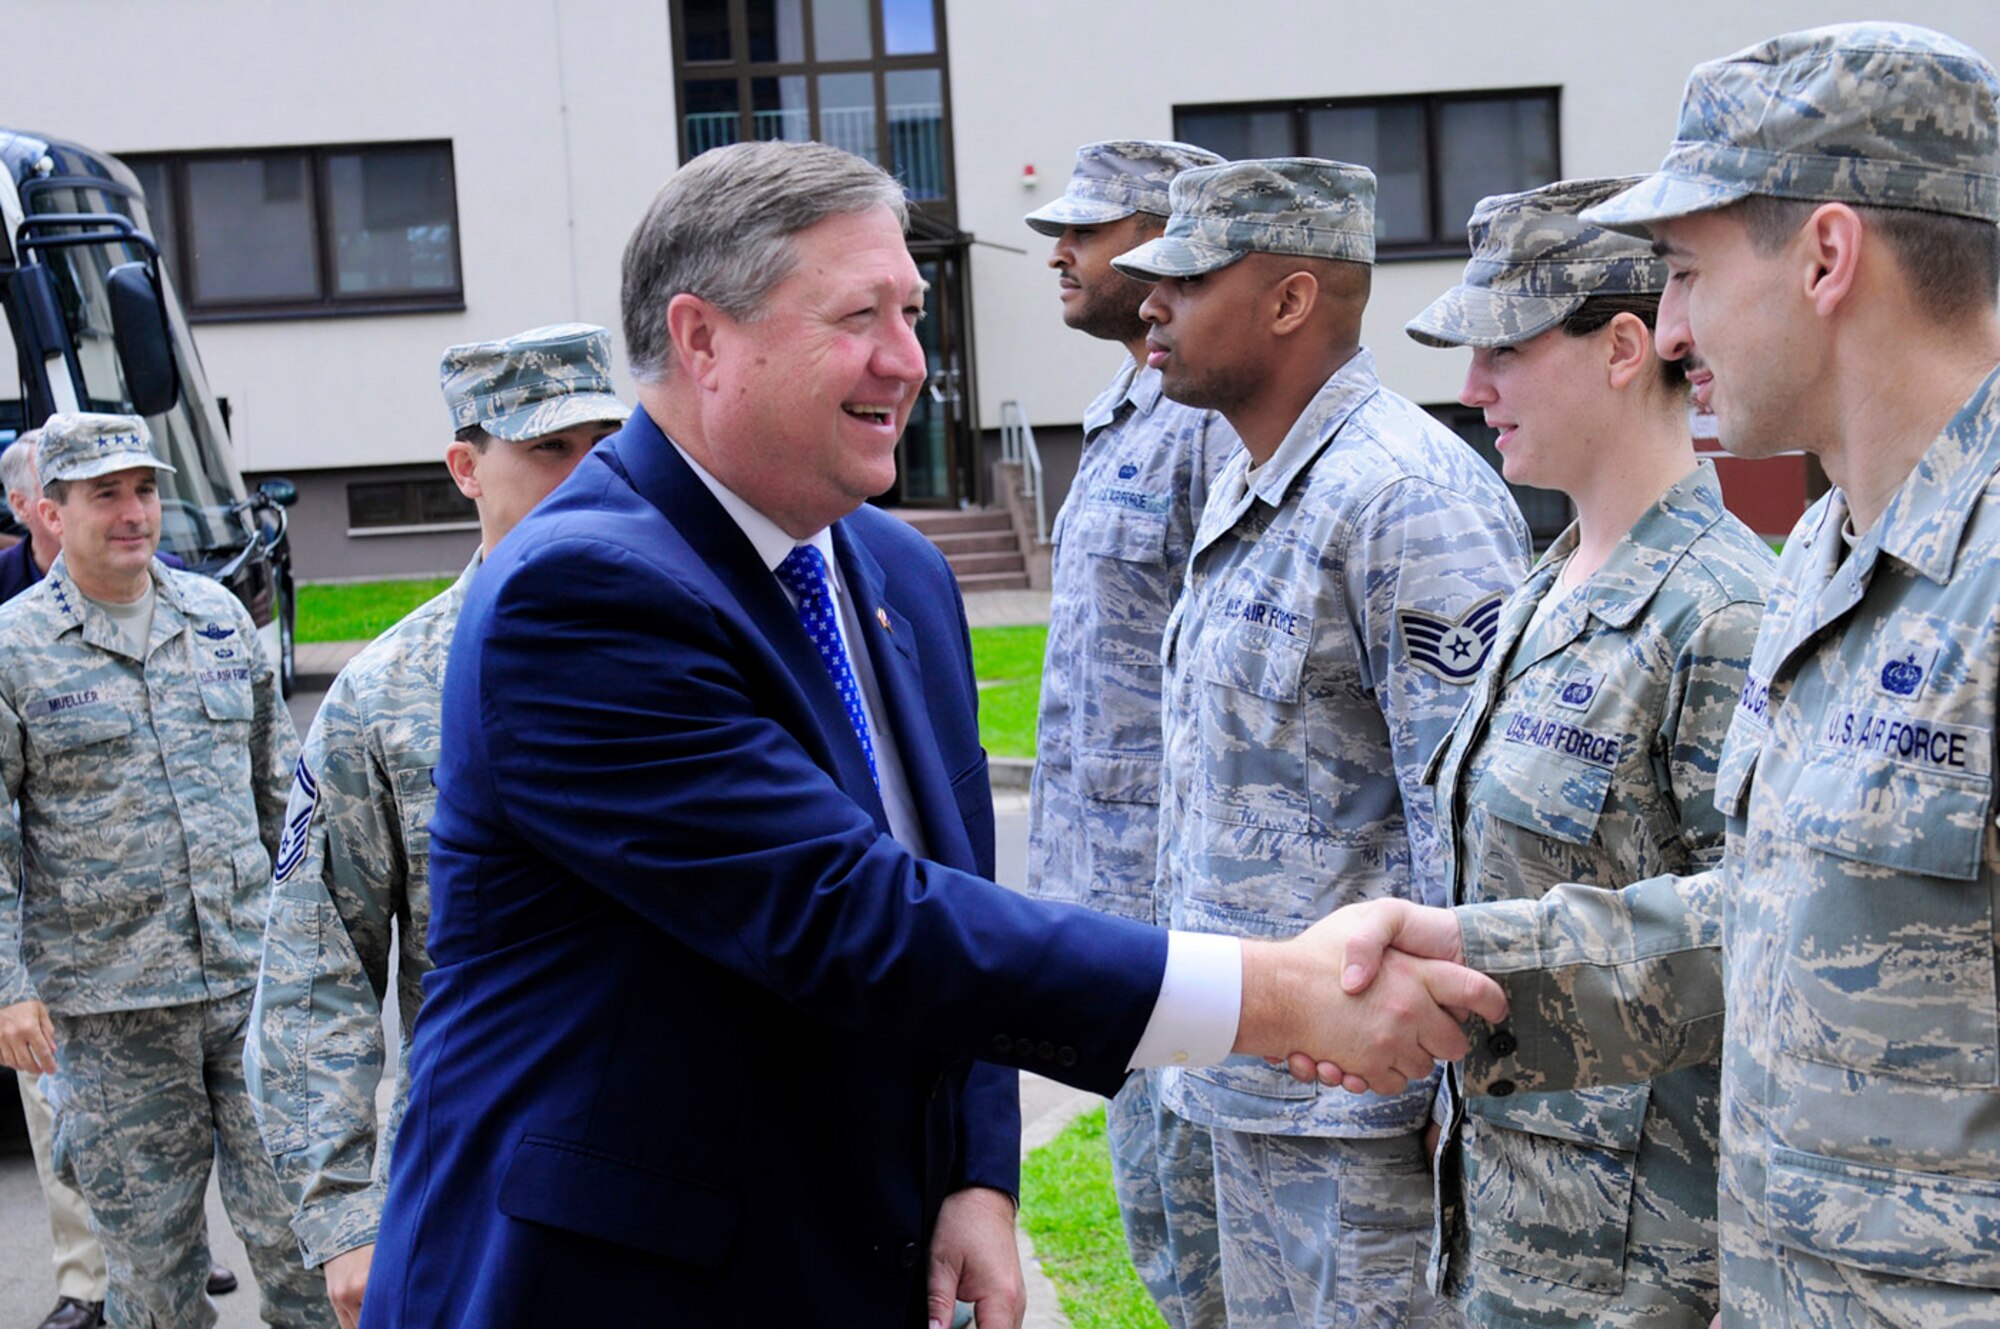 Secretary of the Air Force Michael Donley greets staff members at the Deployment Transition Center at Ramstein Air Base, Germany, June 18, 2011.The secretary traveled to Europe to meet with Airmen and receive updates from command leaders on U.S. Air Forces in Europe efforts to build partnership capacity and ongoing contingency support for Operation Unified Protector. (U.S. Air Force photo/Airman 1st Class Brea Miller)